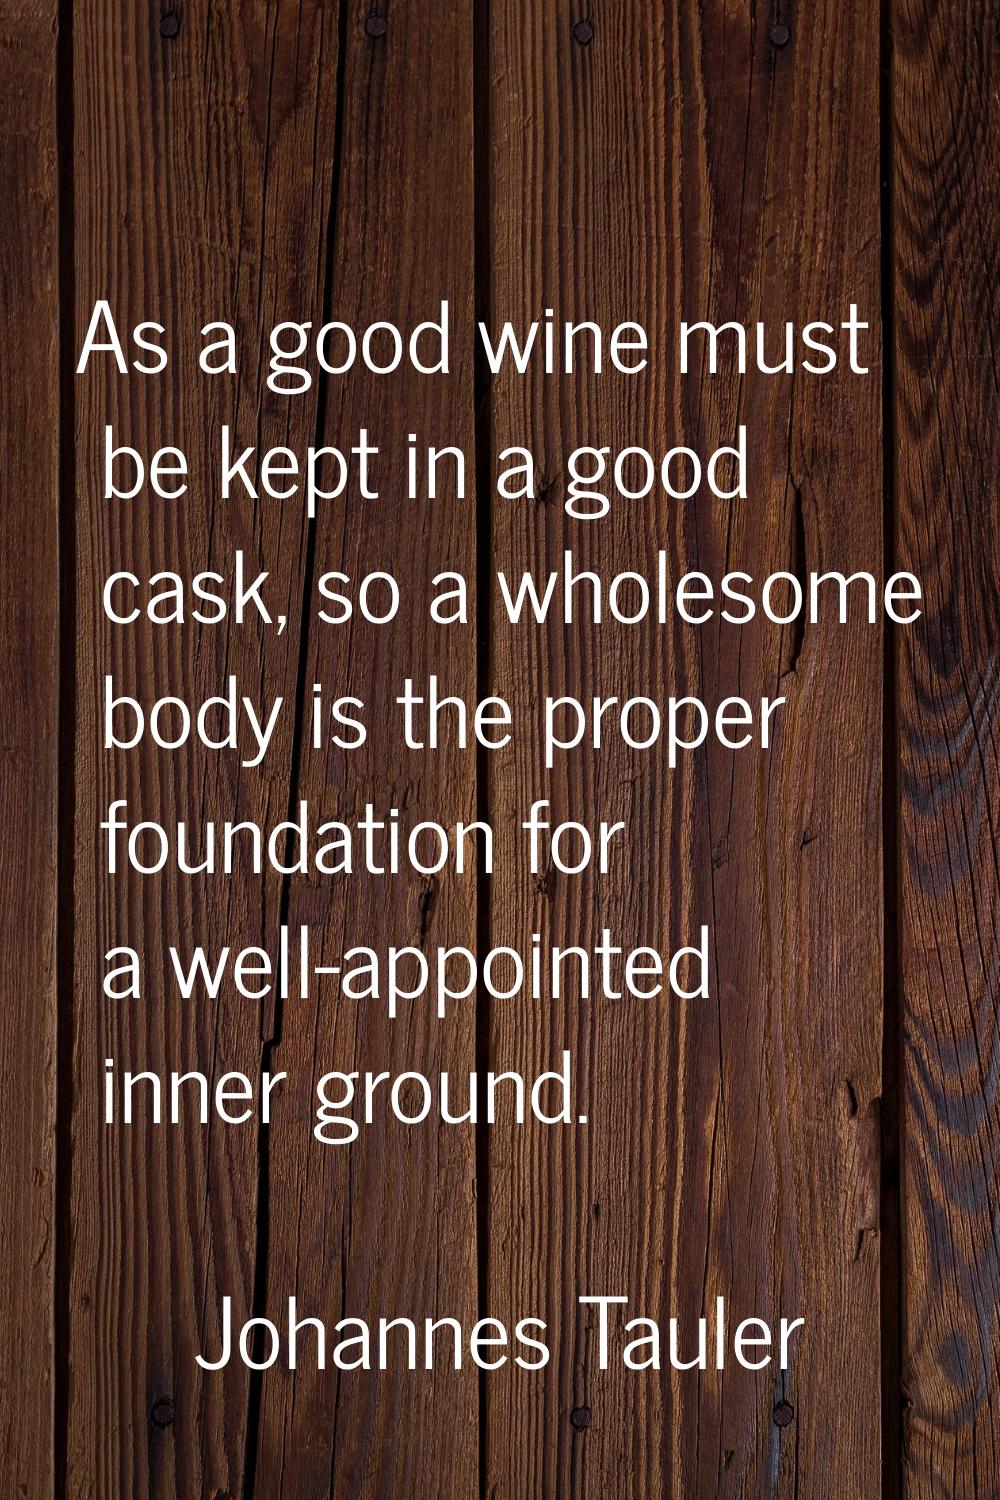 As a good wine must be kept in a good cask, so a wholesome body is the proper foundation for a well